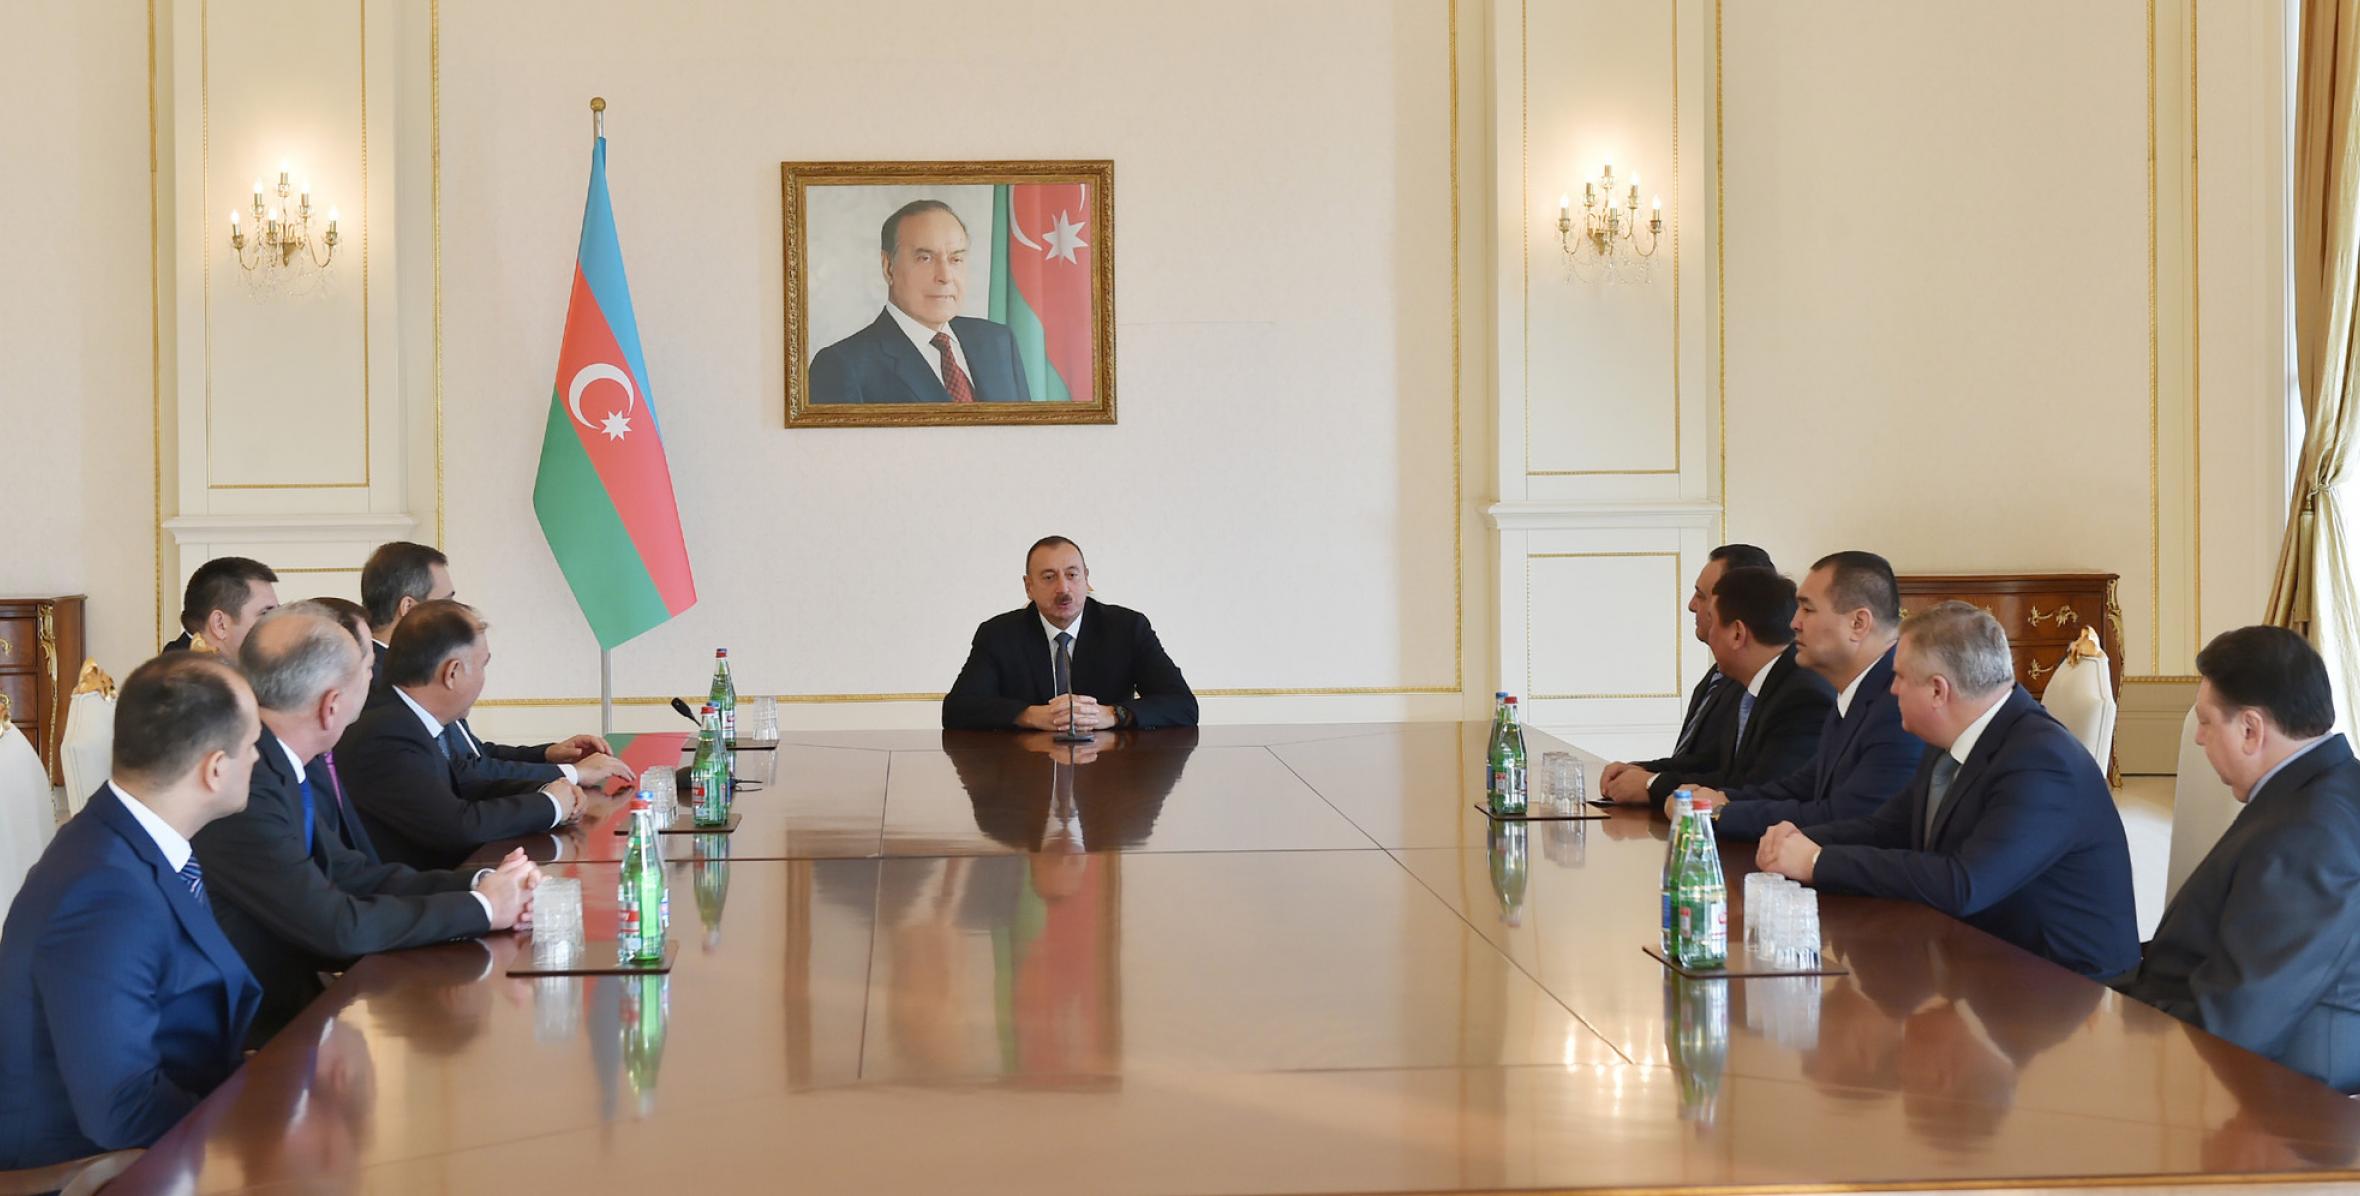 Speech by Ilham Aliyev at the reception of the participants of the 18th meeting of the Conference of Special Service Bodies of Turkic-speaking States